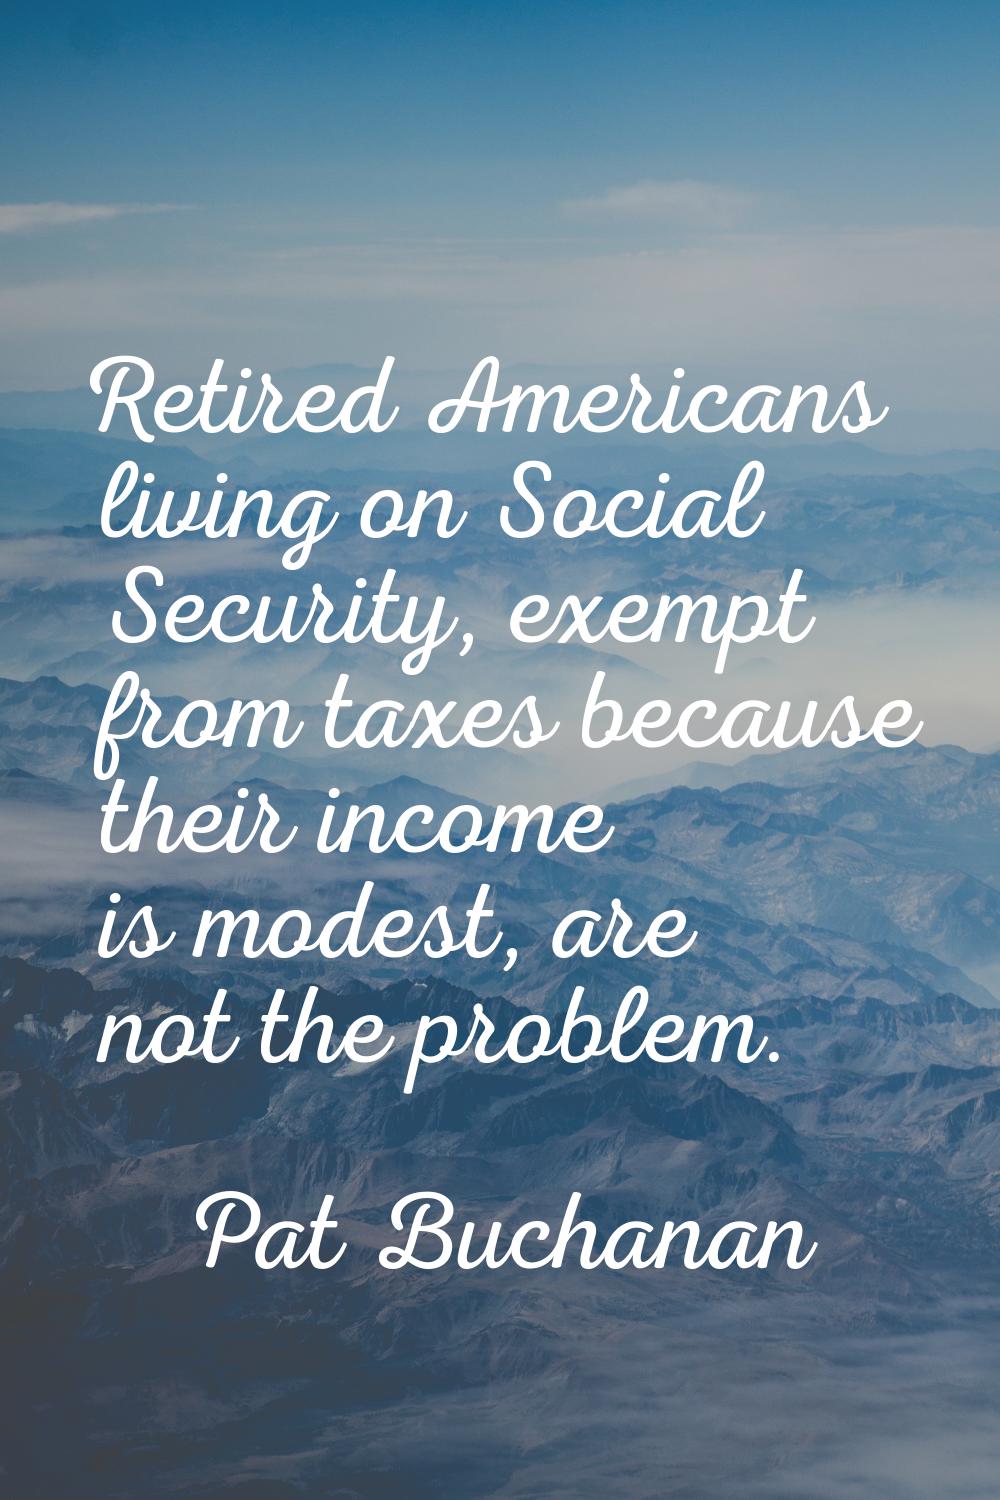 Retired Americans living on Social Security, exempt from taxes because their income is modest, are 